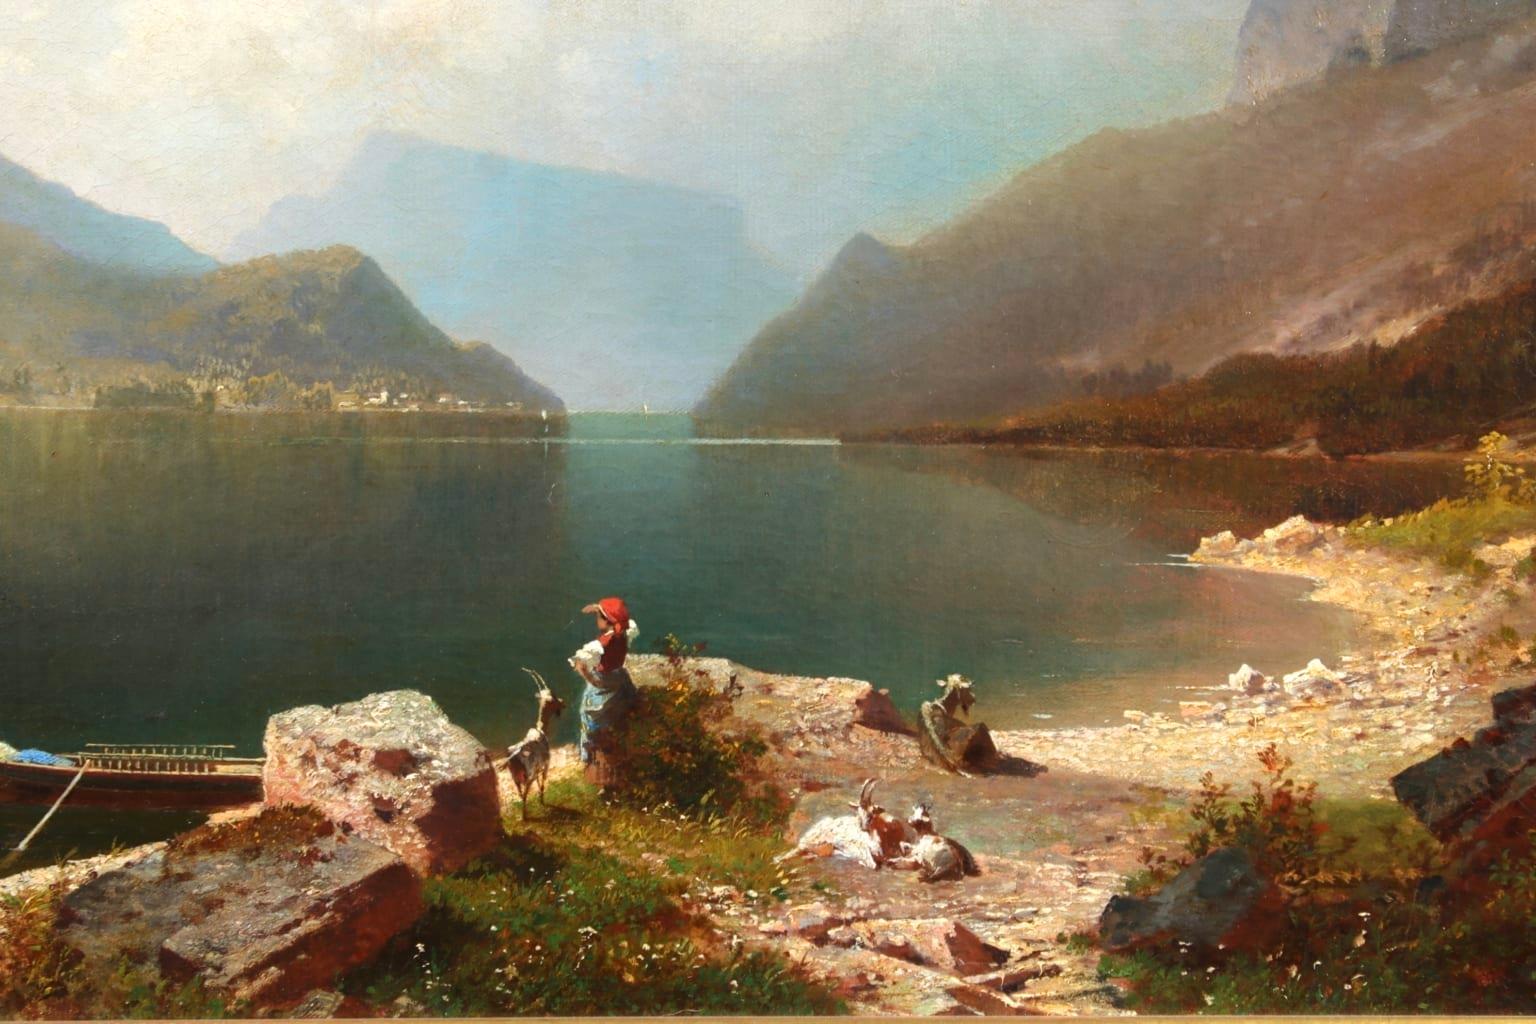 A beautiful oil on original canvas by Austrian Romantic painter Franz Richard Unterberger depicting  a figure on the lake's edge looking out across the lake, with a boat moored on the rocks and a view of the mountains in the distance. Lake Achen